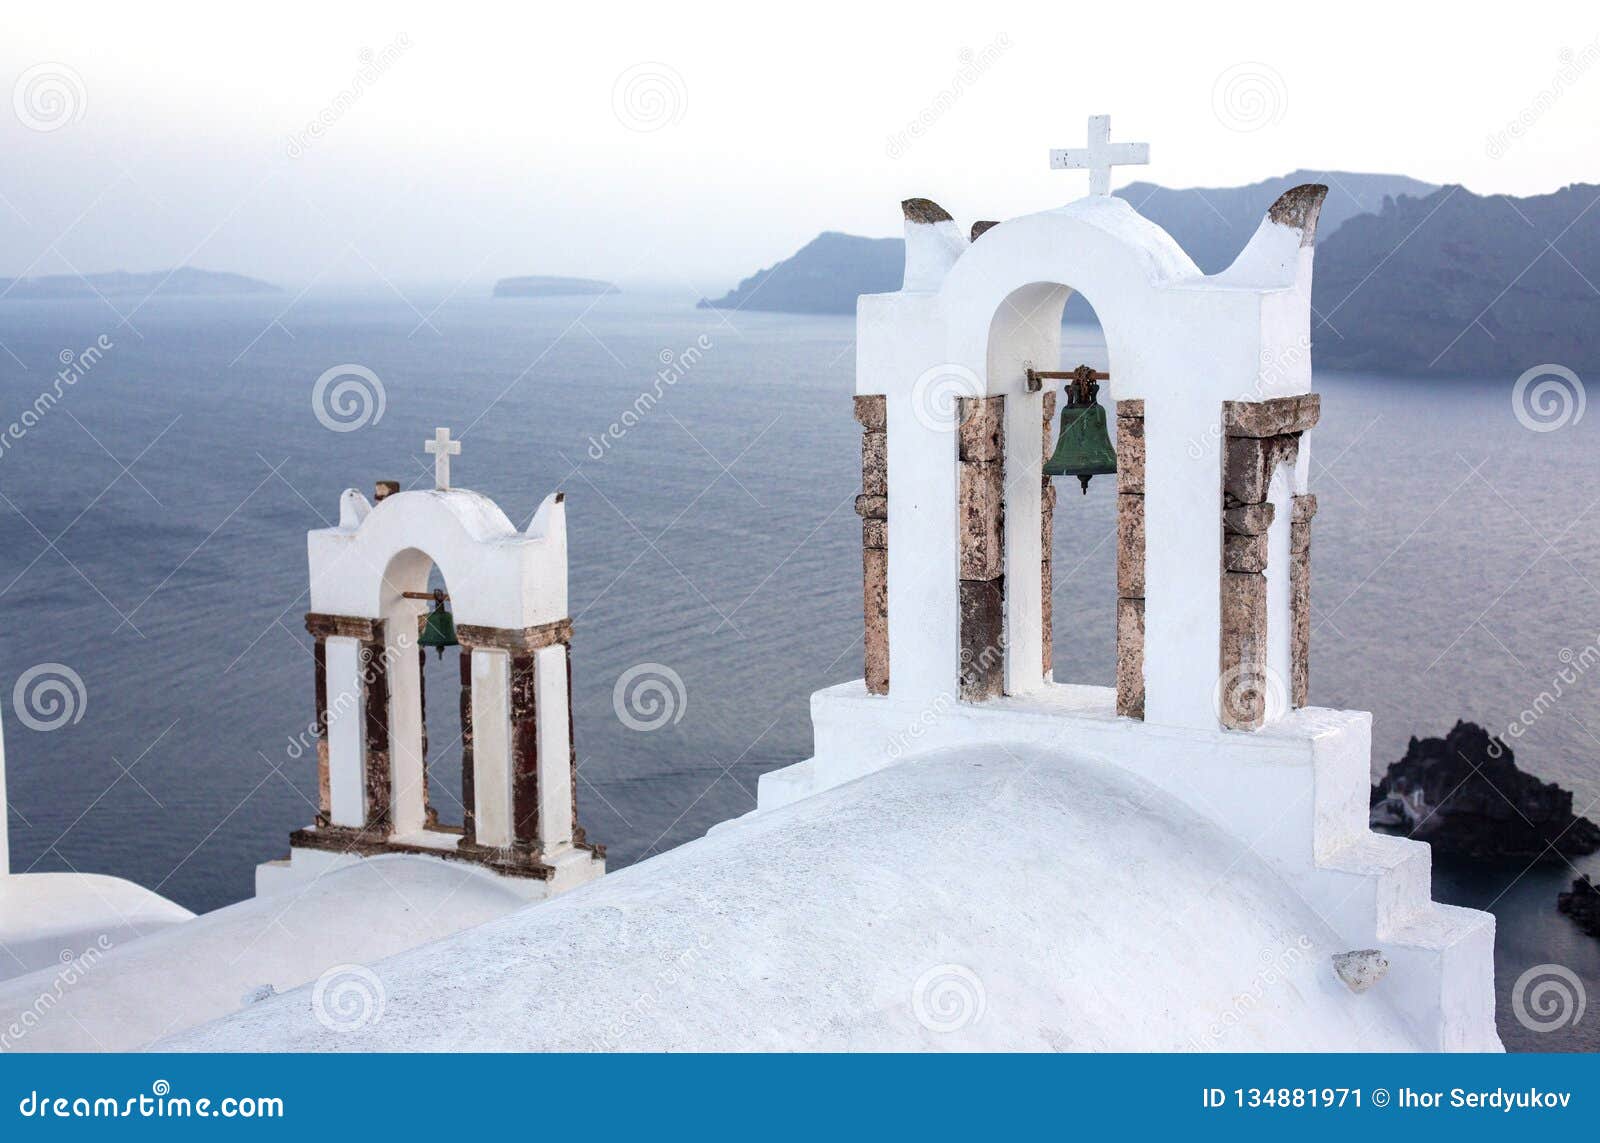 arch with a bell, white houses and church with blue domes in oia or ia at golden sunset, island santorini, greece. - immagine